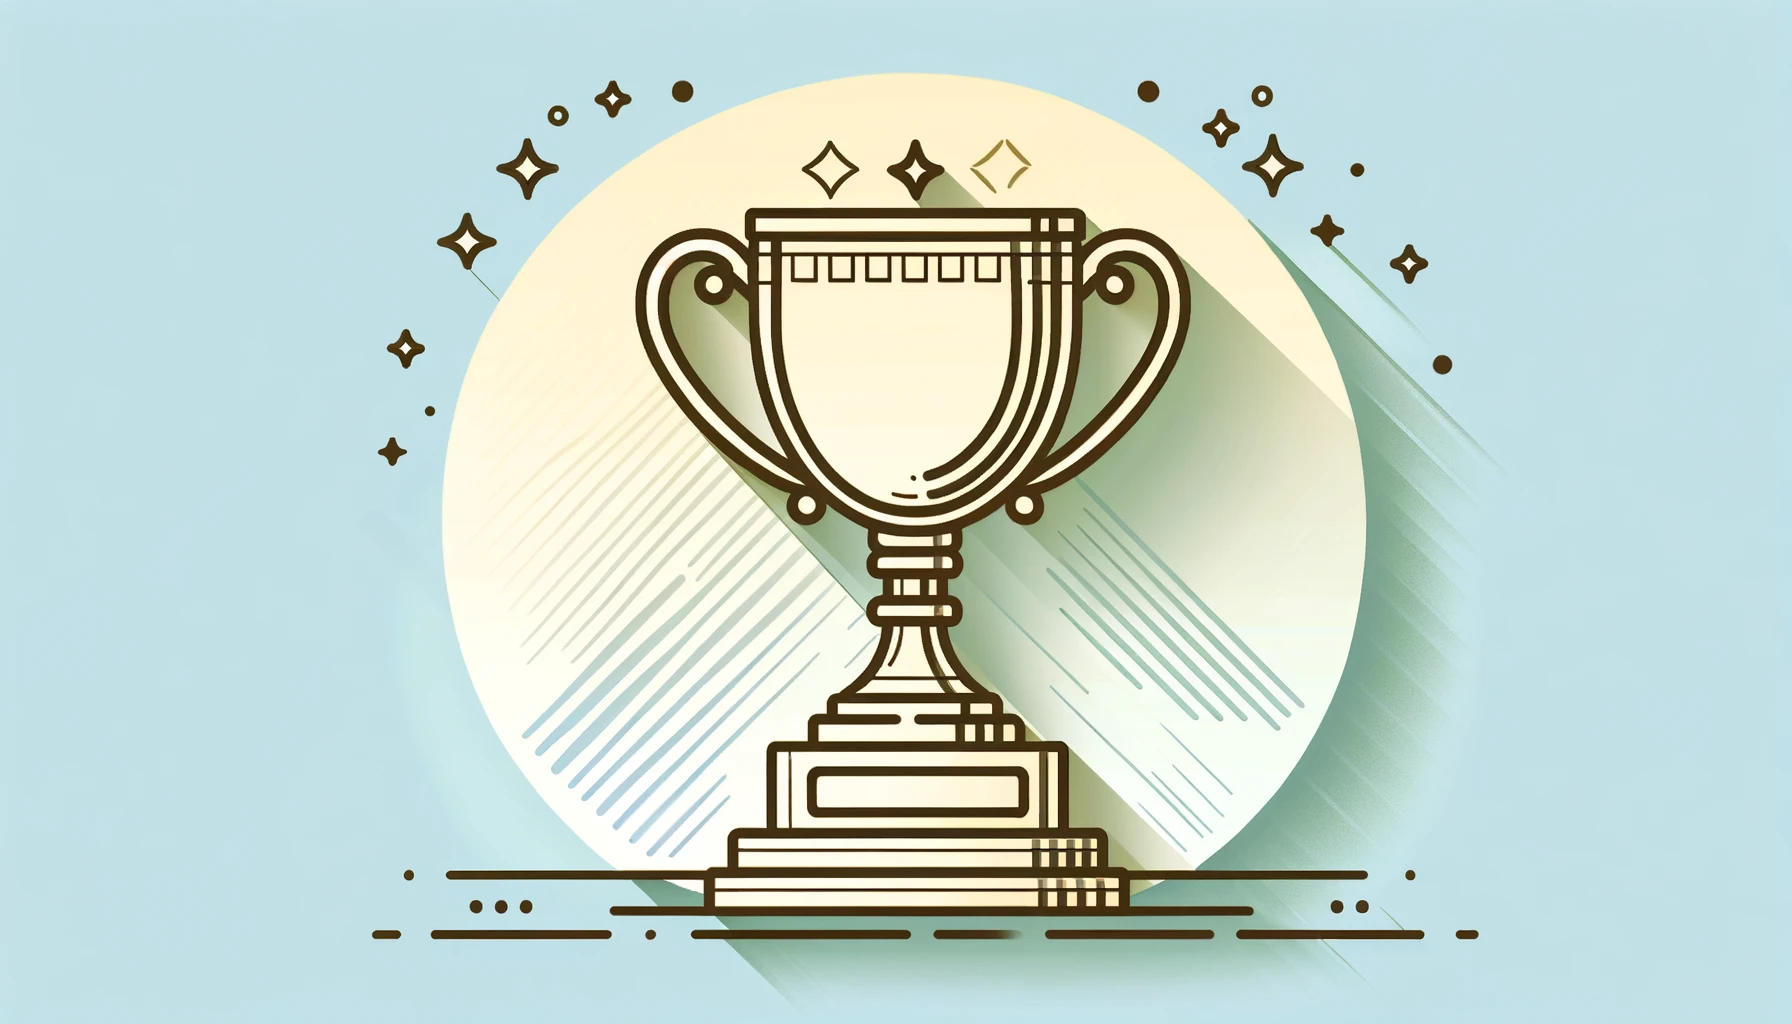 A trophy image to depict best practices for collecting VoC data